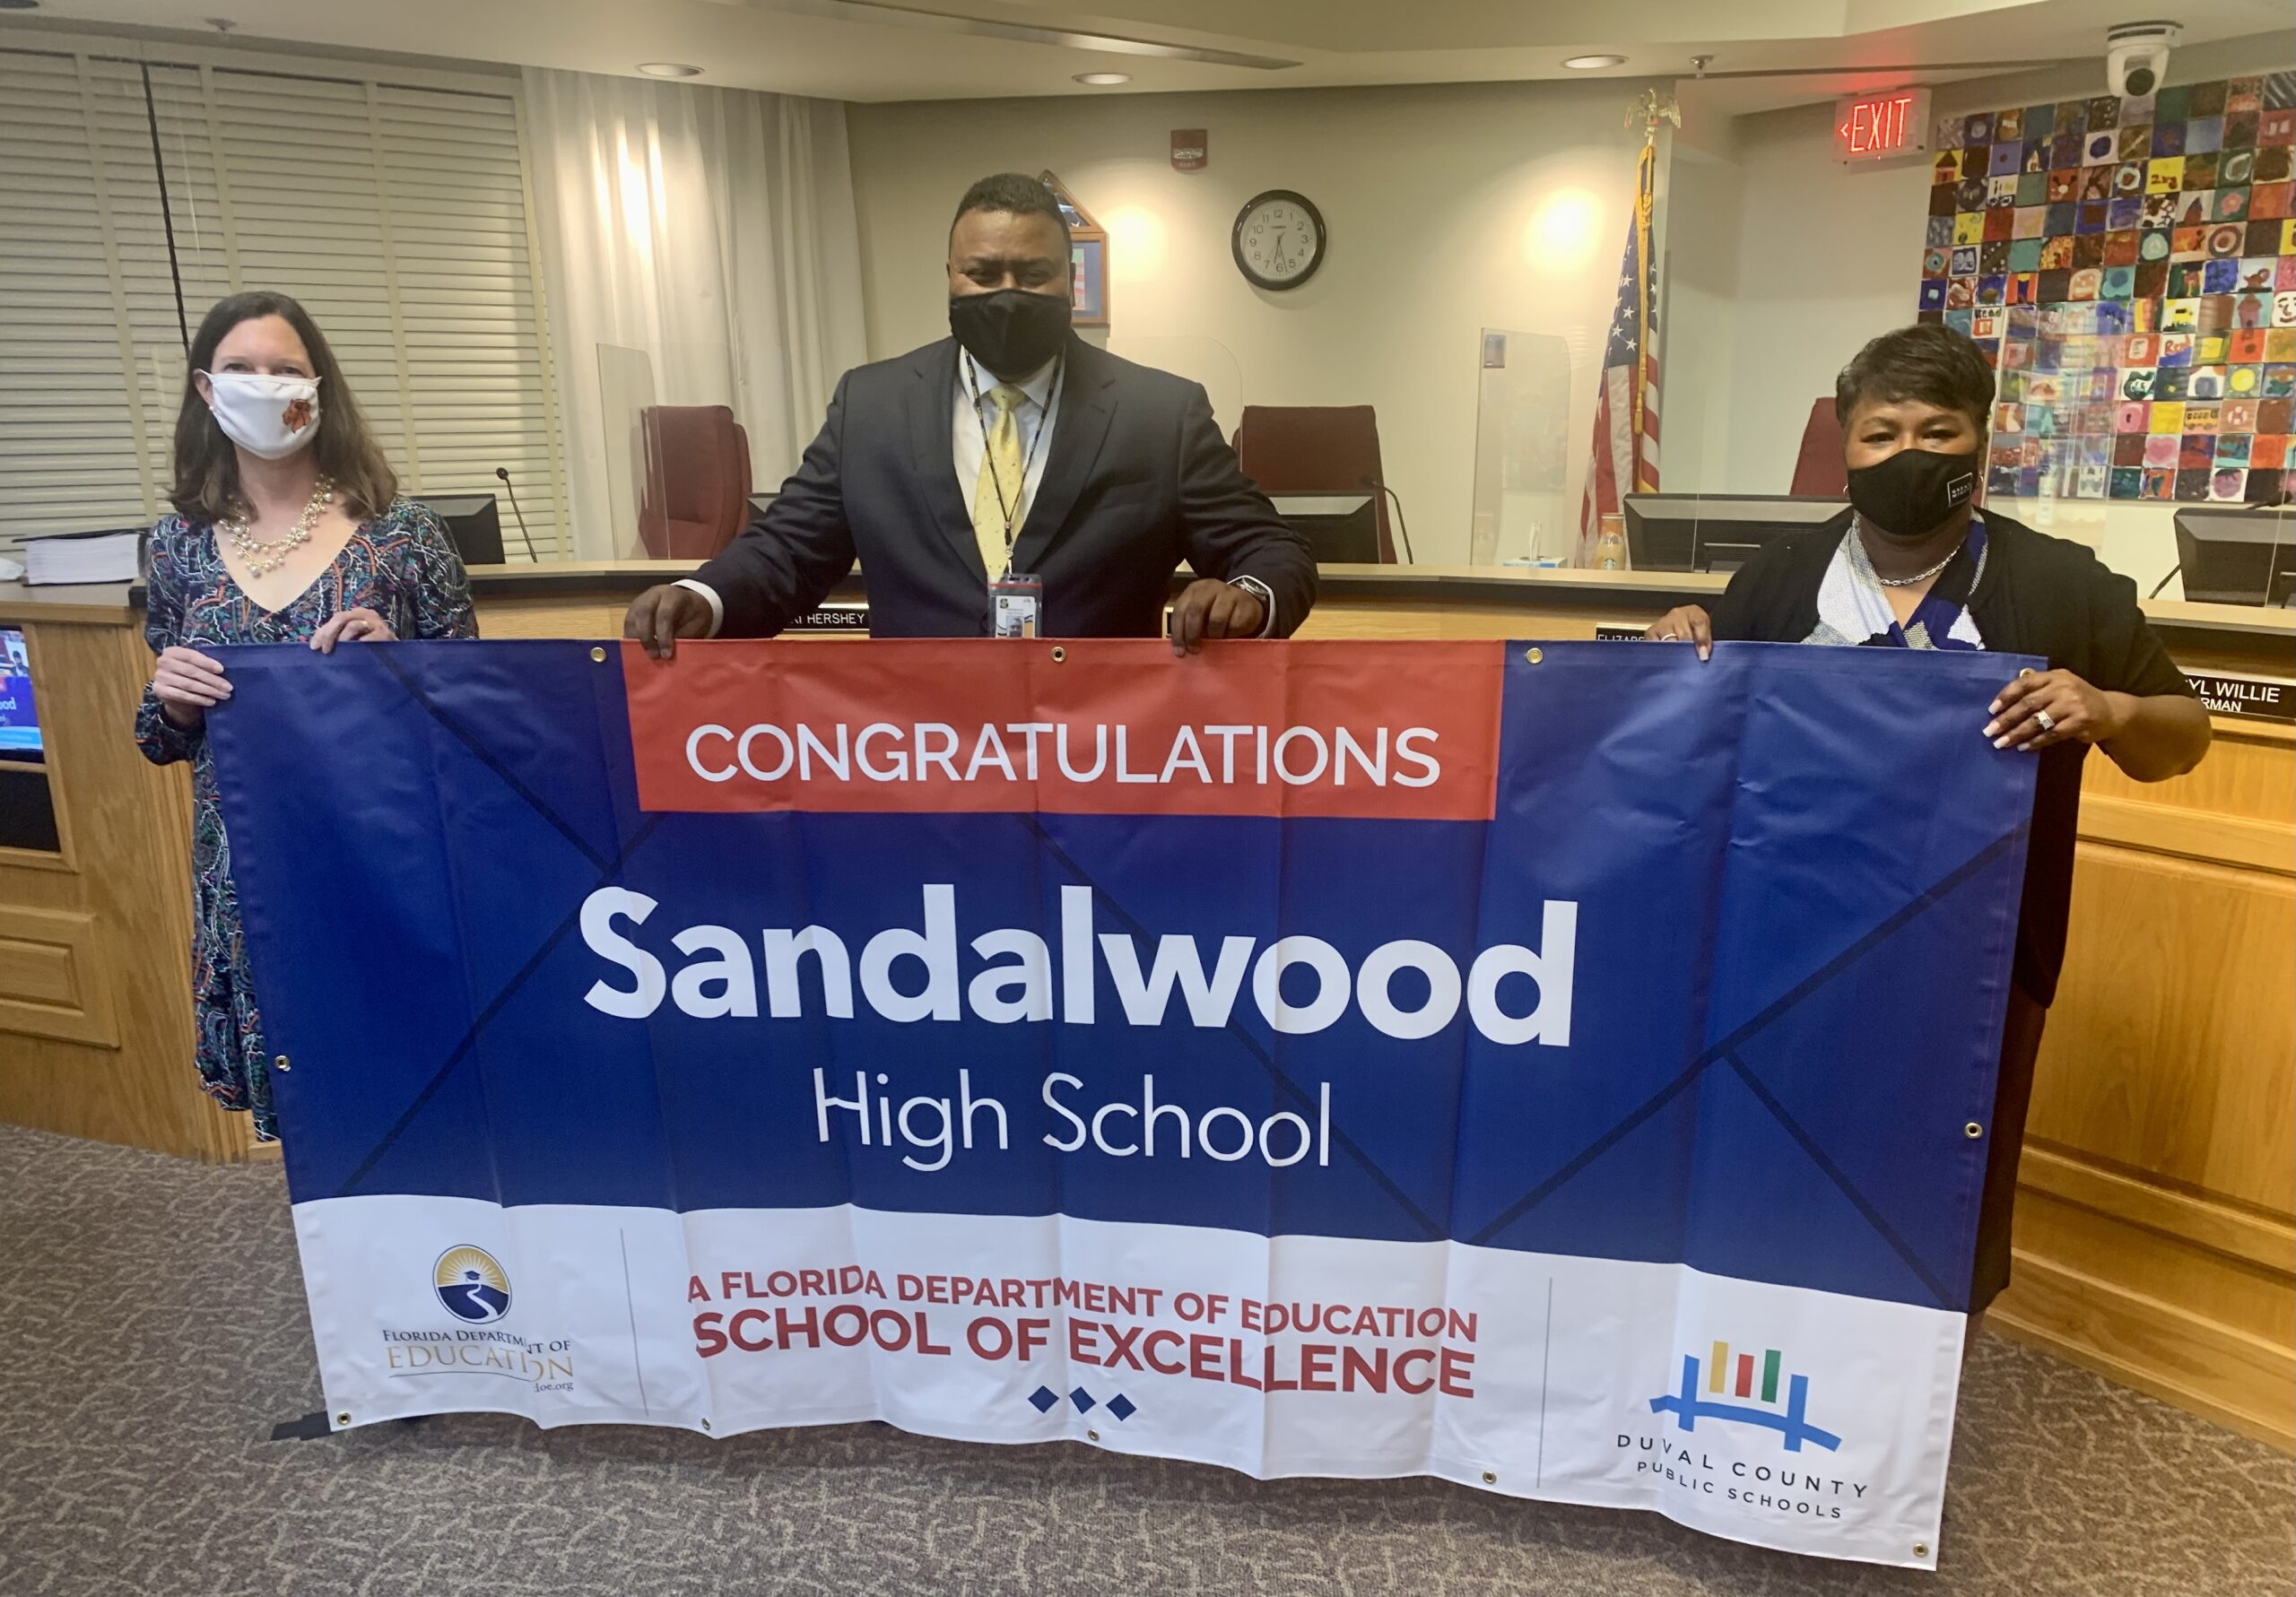 Superintendent, Board Member and school administrator hold banner Congratulations Sandalwood High School a Florida Department of Education School of Excellence